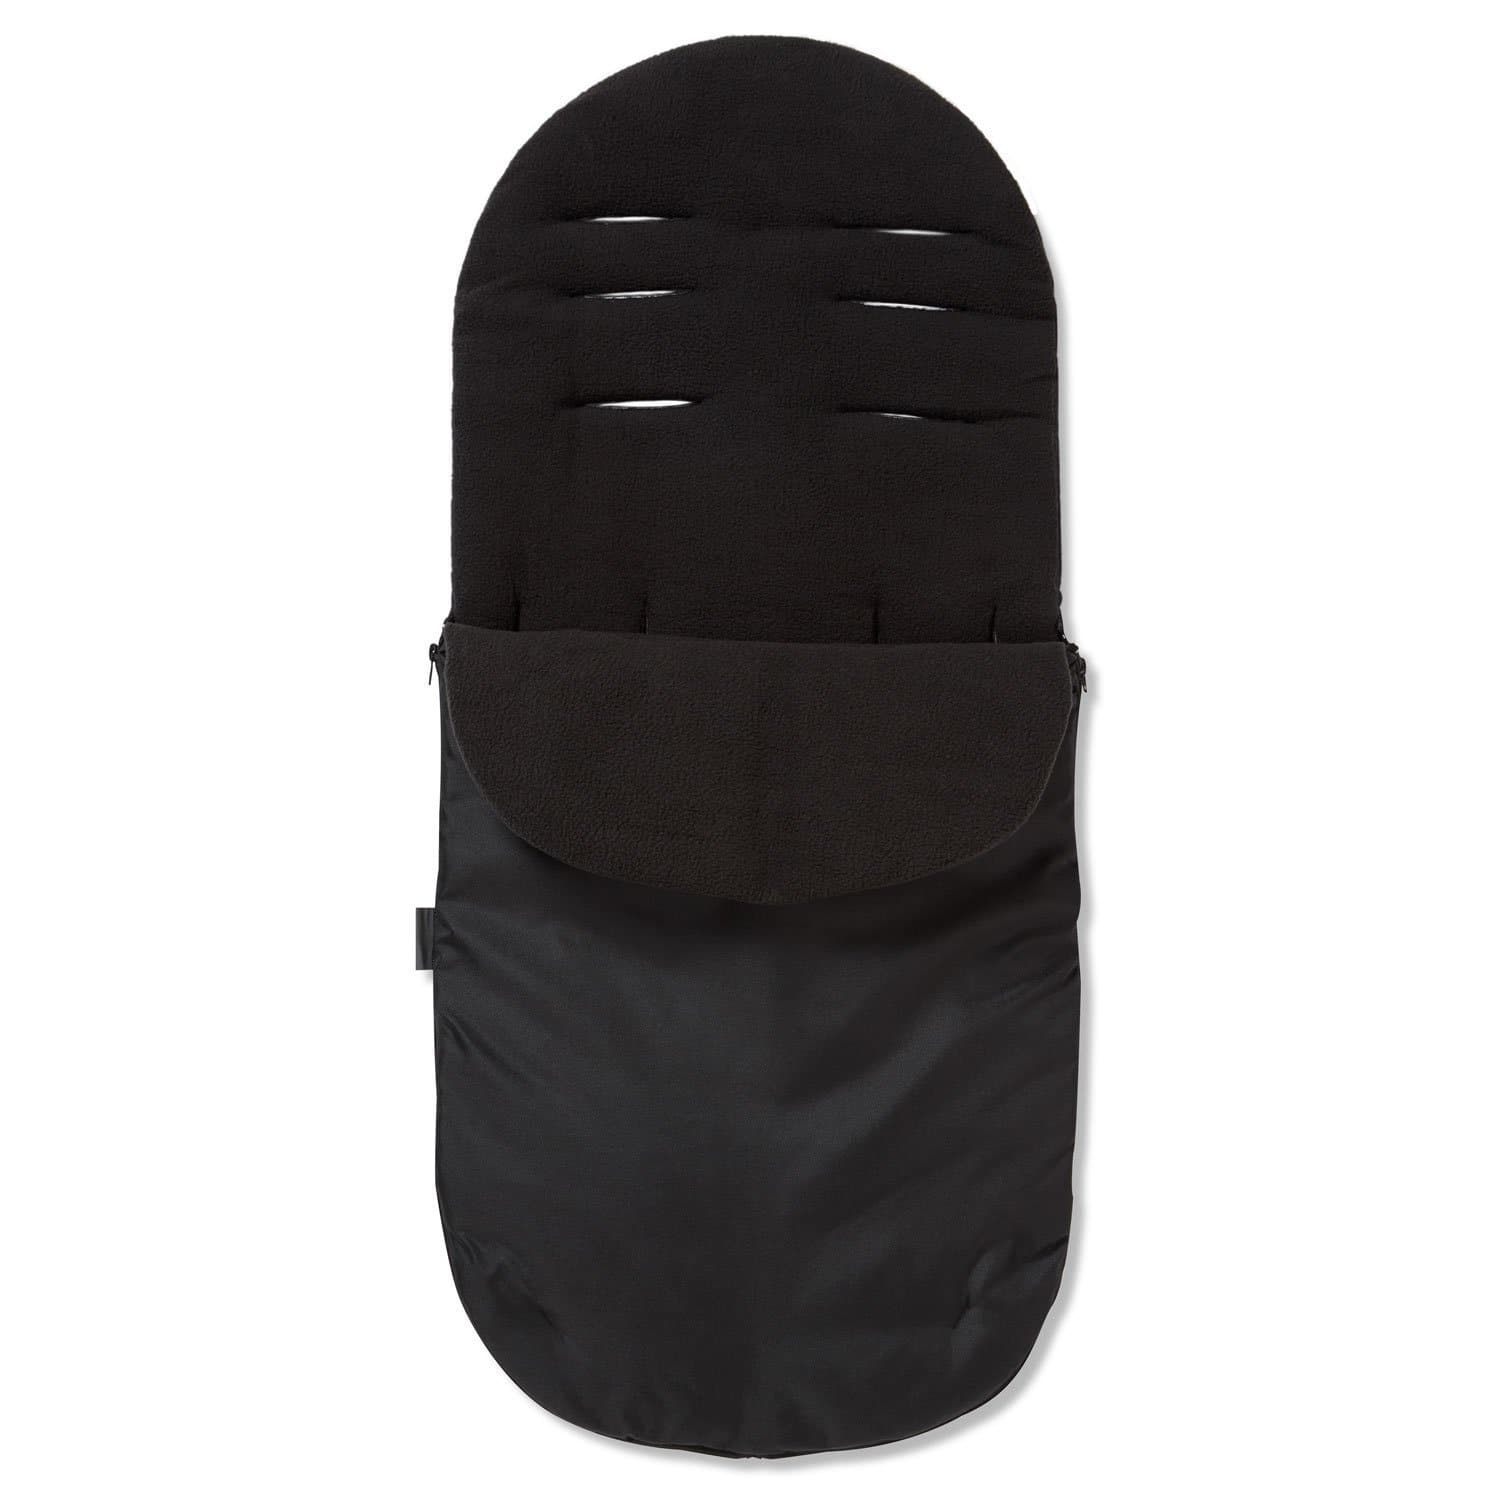 Footmuff / Cosy Toes Compatible with Diono - Black / Fits All Models | For Your Little One